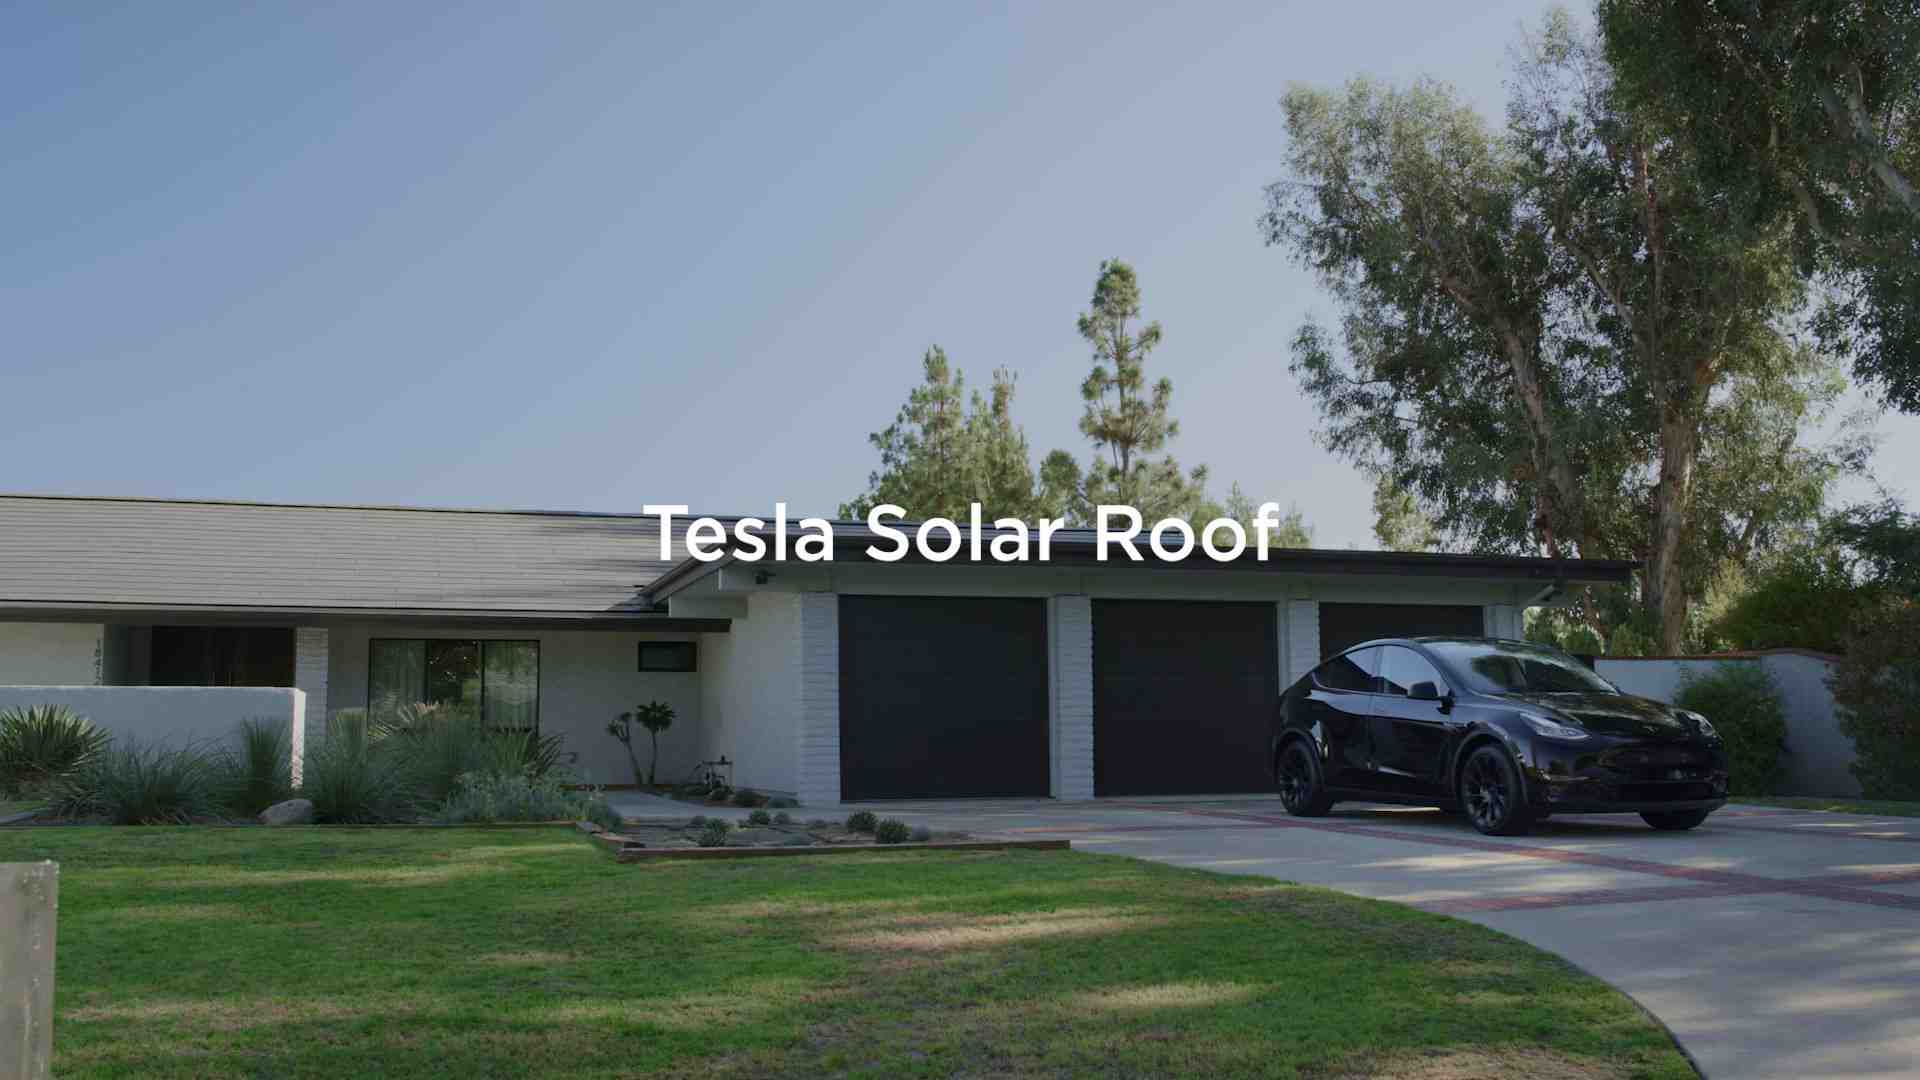 Where is Tesla solar located?